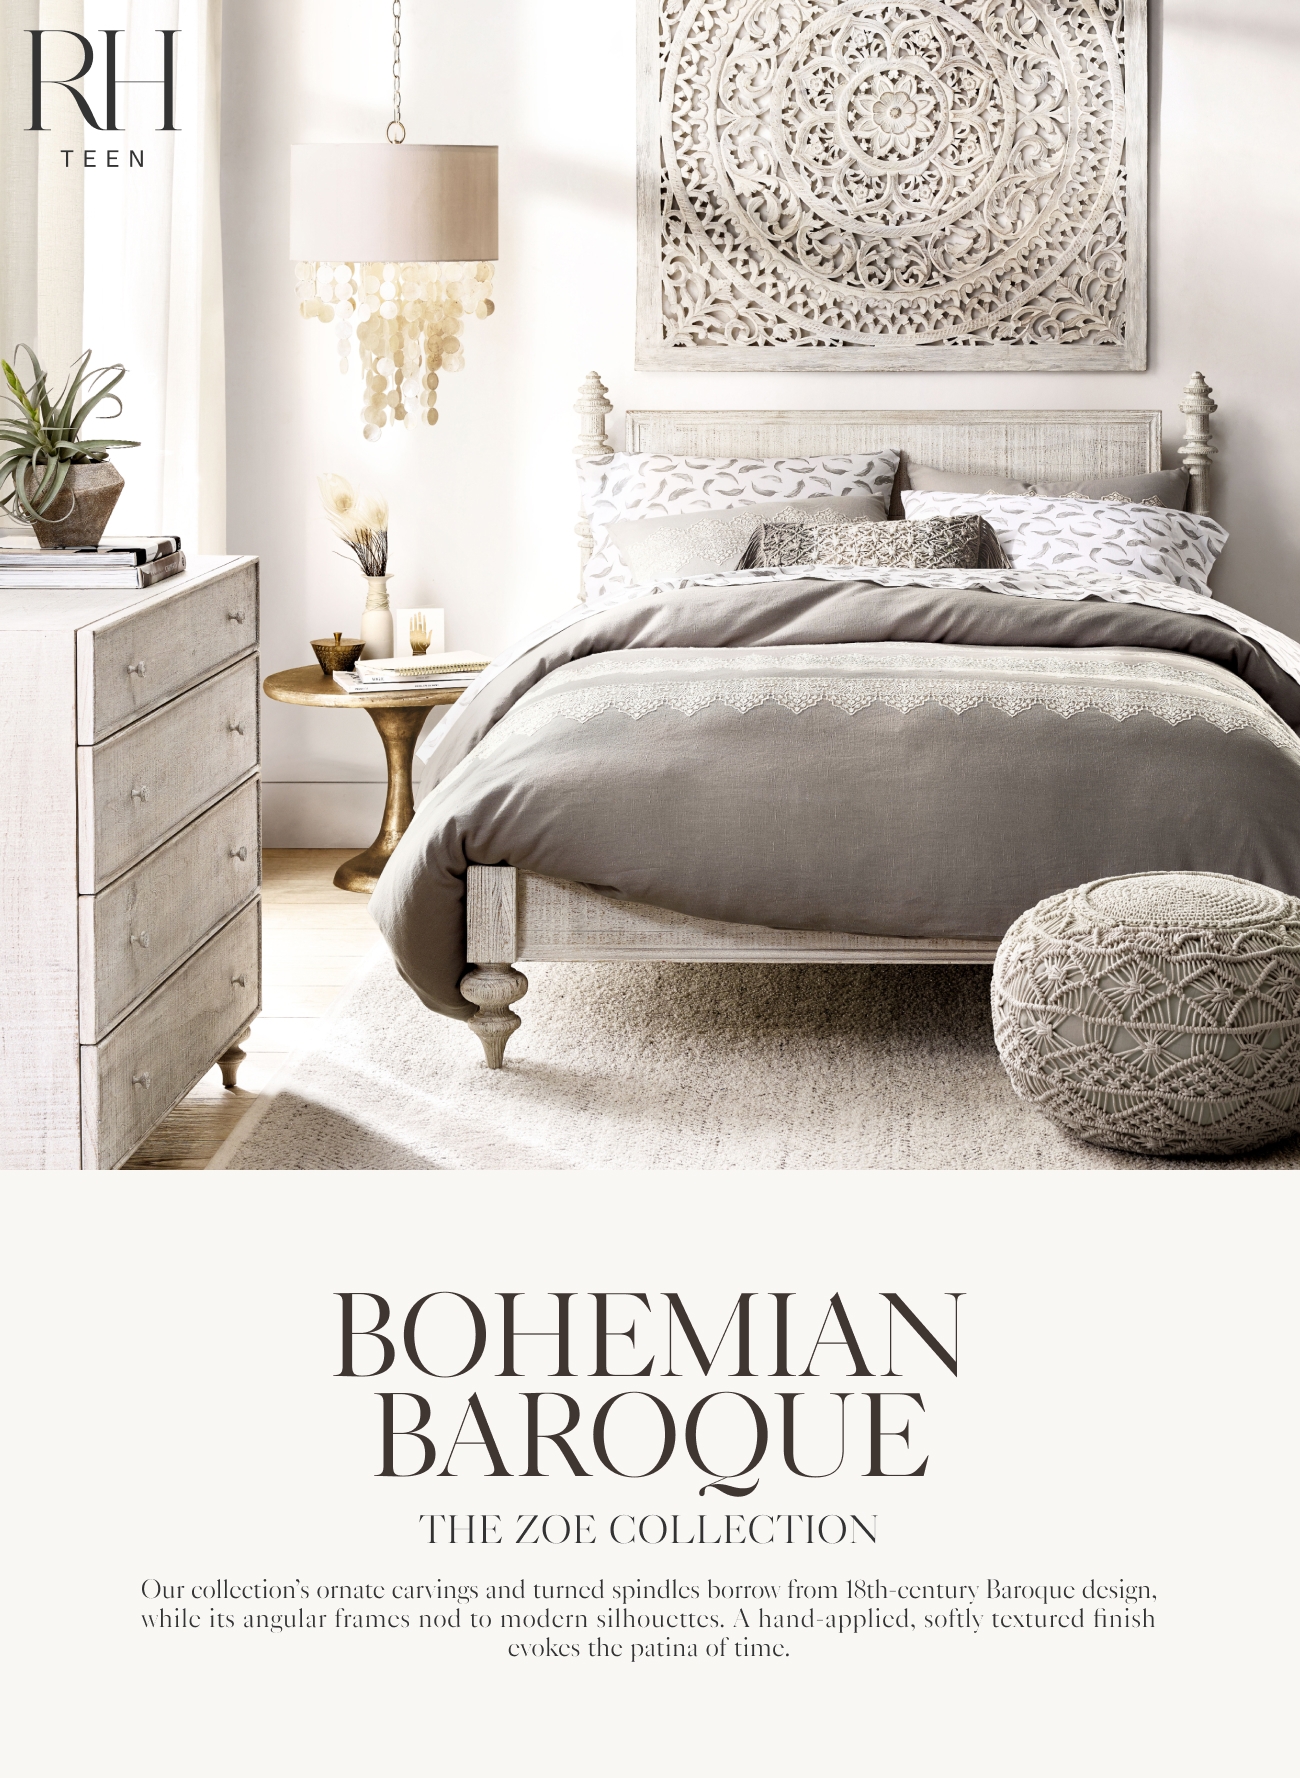  BOHEMIAN BAROQUL THE ZOE COLLECTION Our collections ornate carvings and turned spindles borrow from 18th-century Baroque design, while its angular frames nod to modern silhoucttes. A hand-applicd, softly textured finish cvokes the patina of time. 